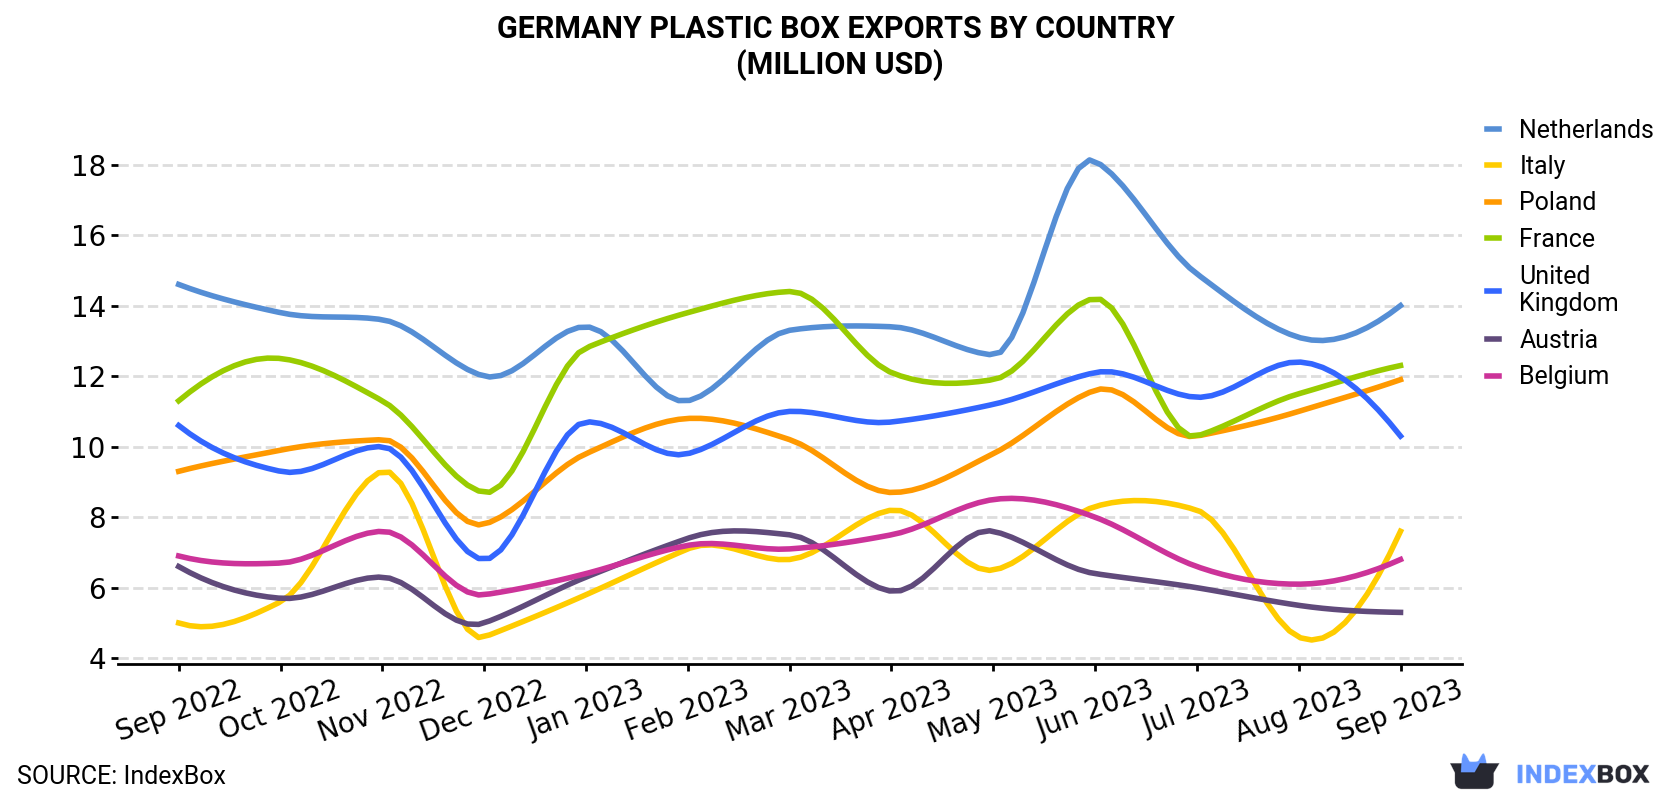 Germany Plastic Box Exports By Country (Million USD)